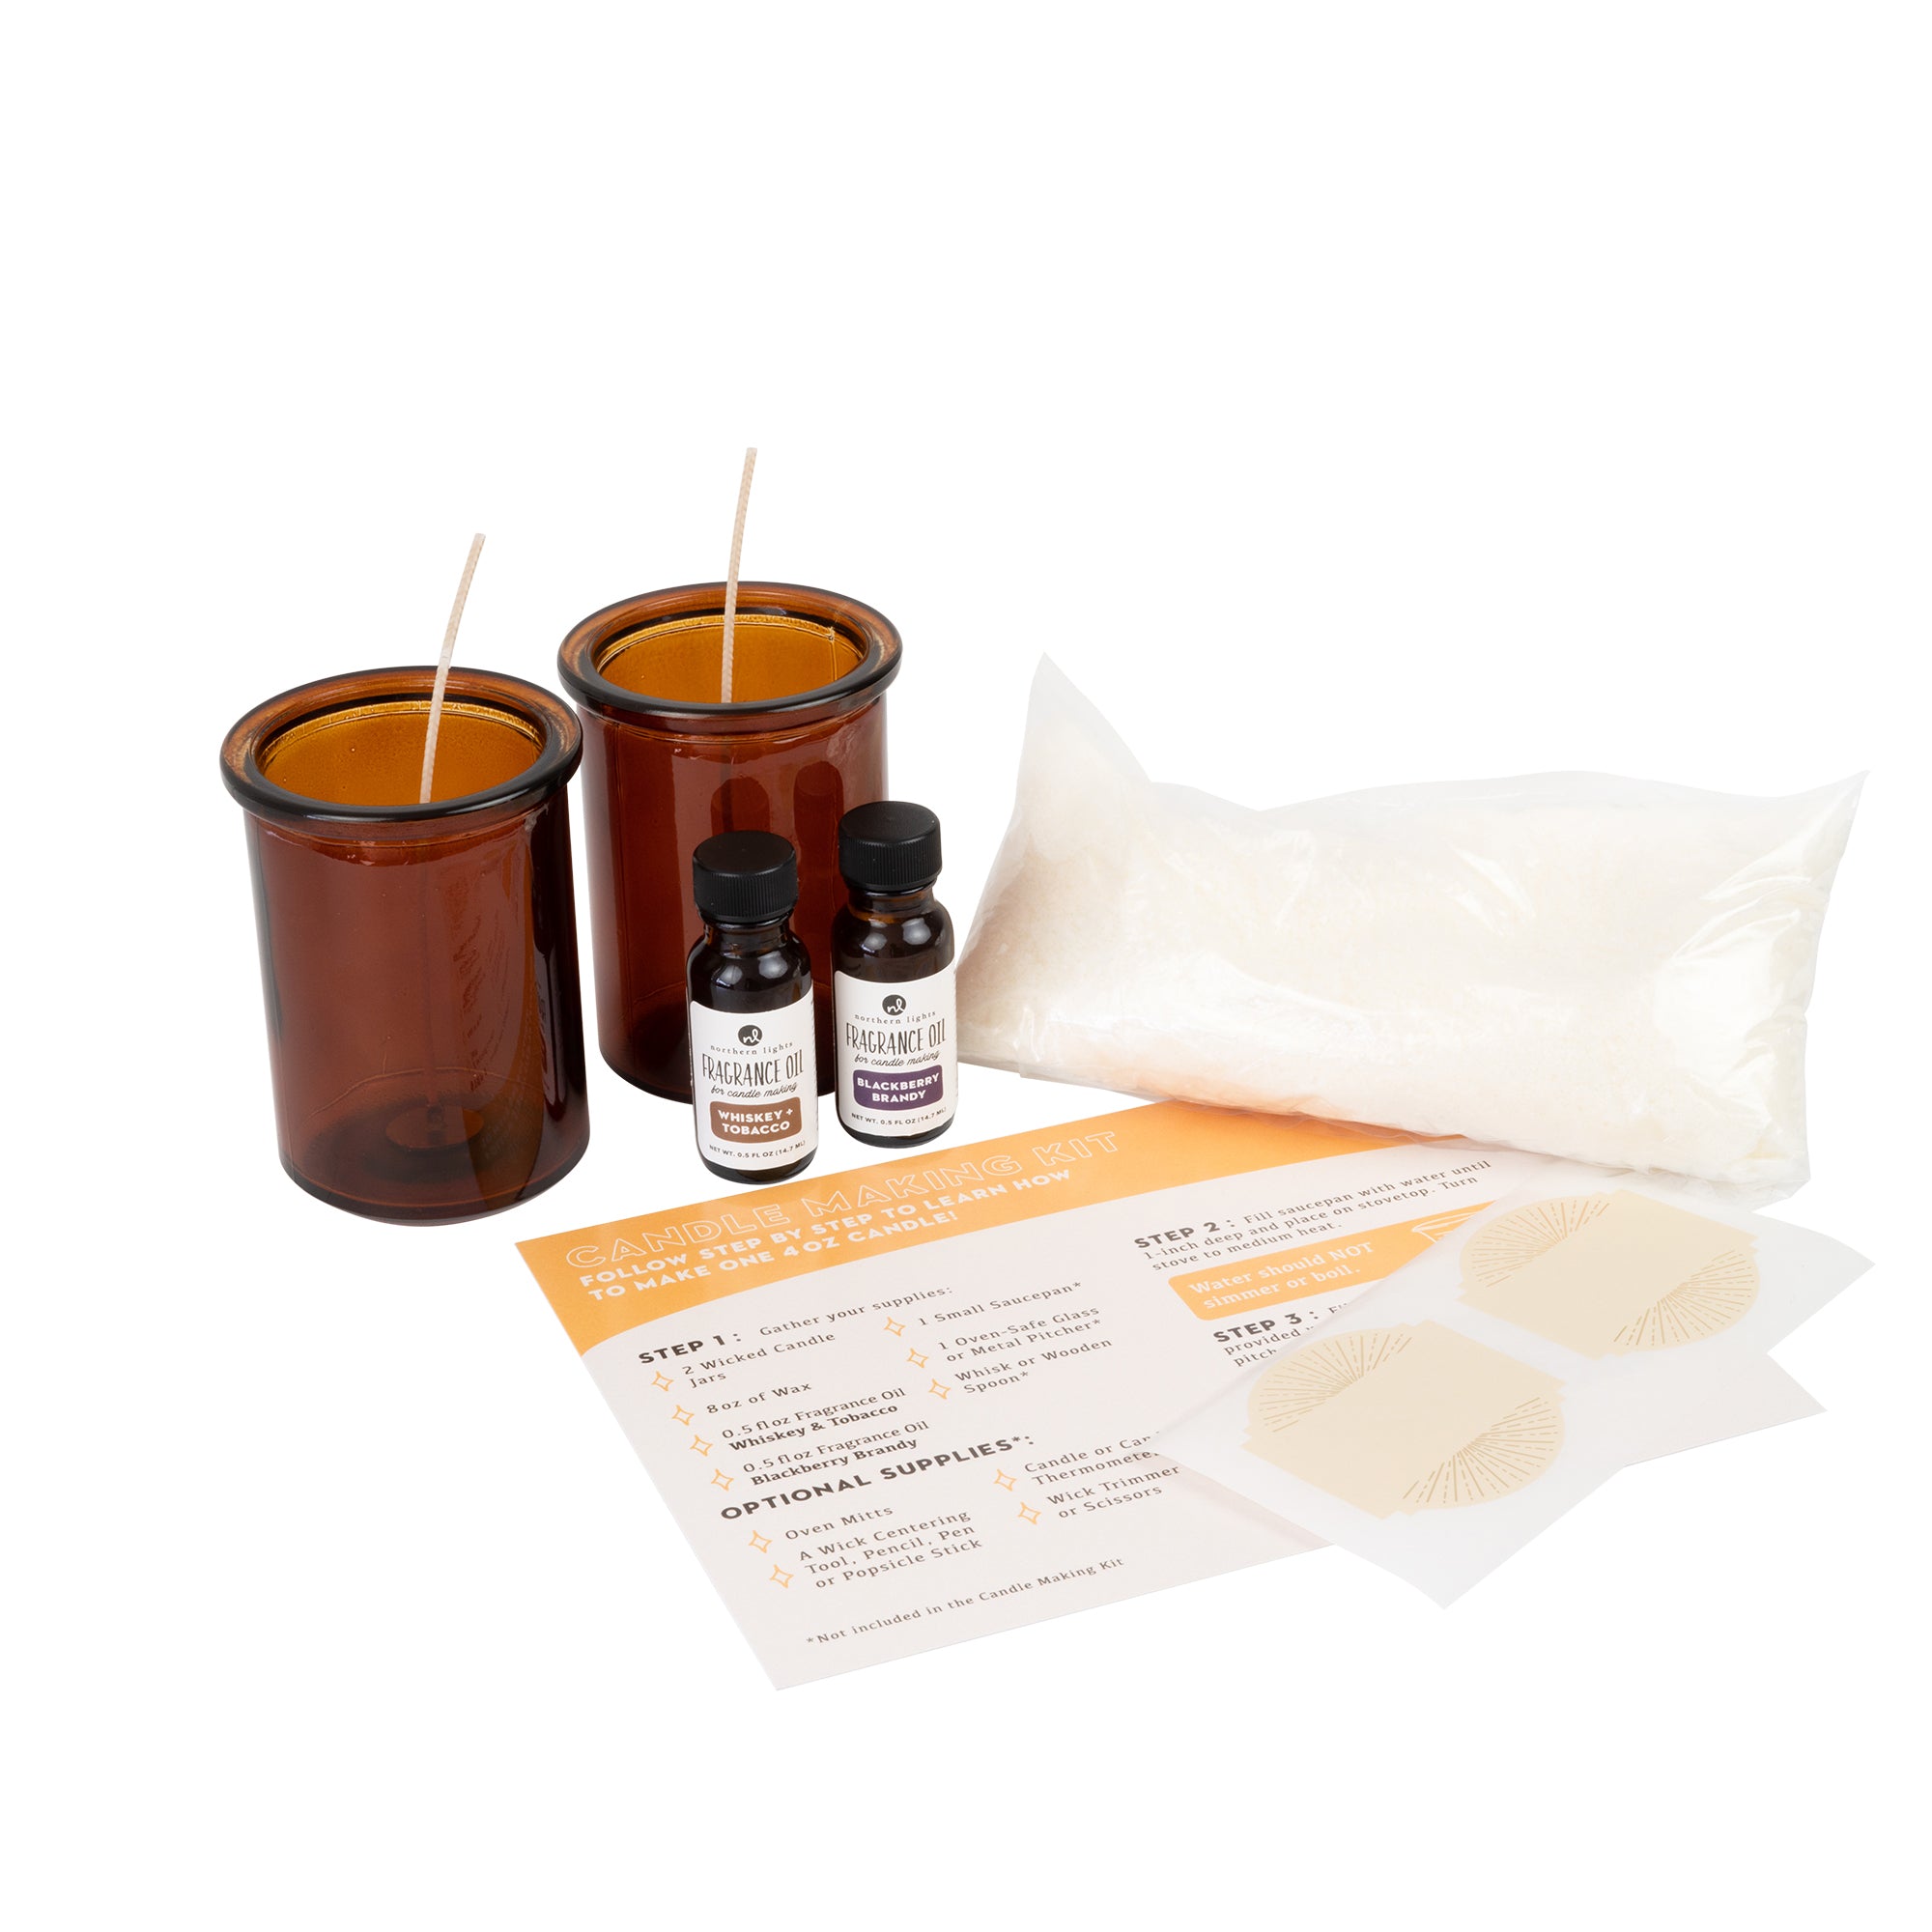 Soy Candle Making Kit to Make 2 DIY Scented Amber Glass Jar